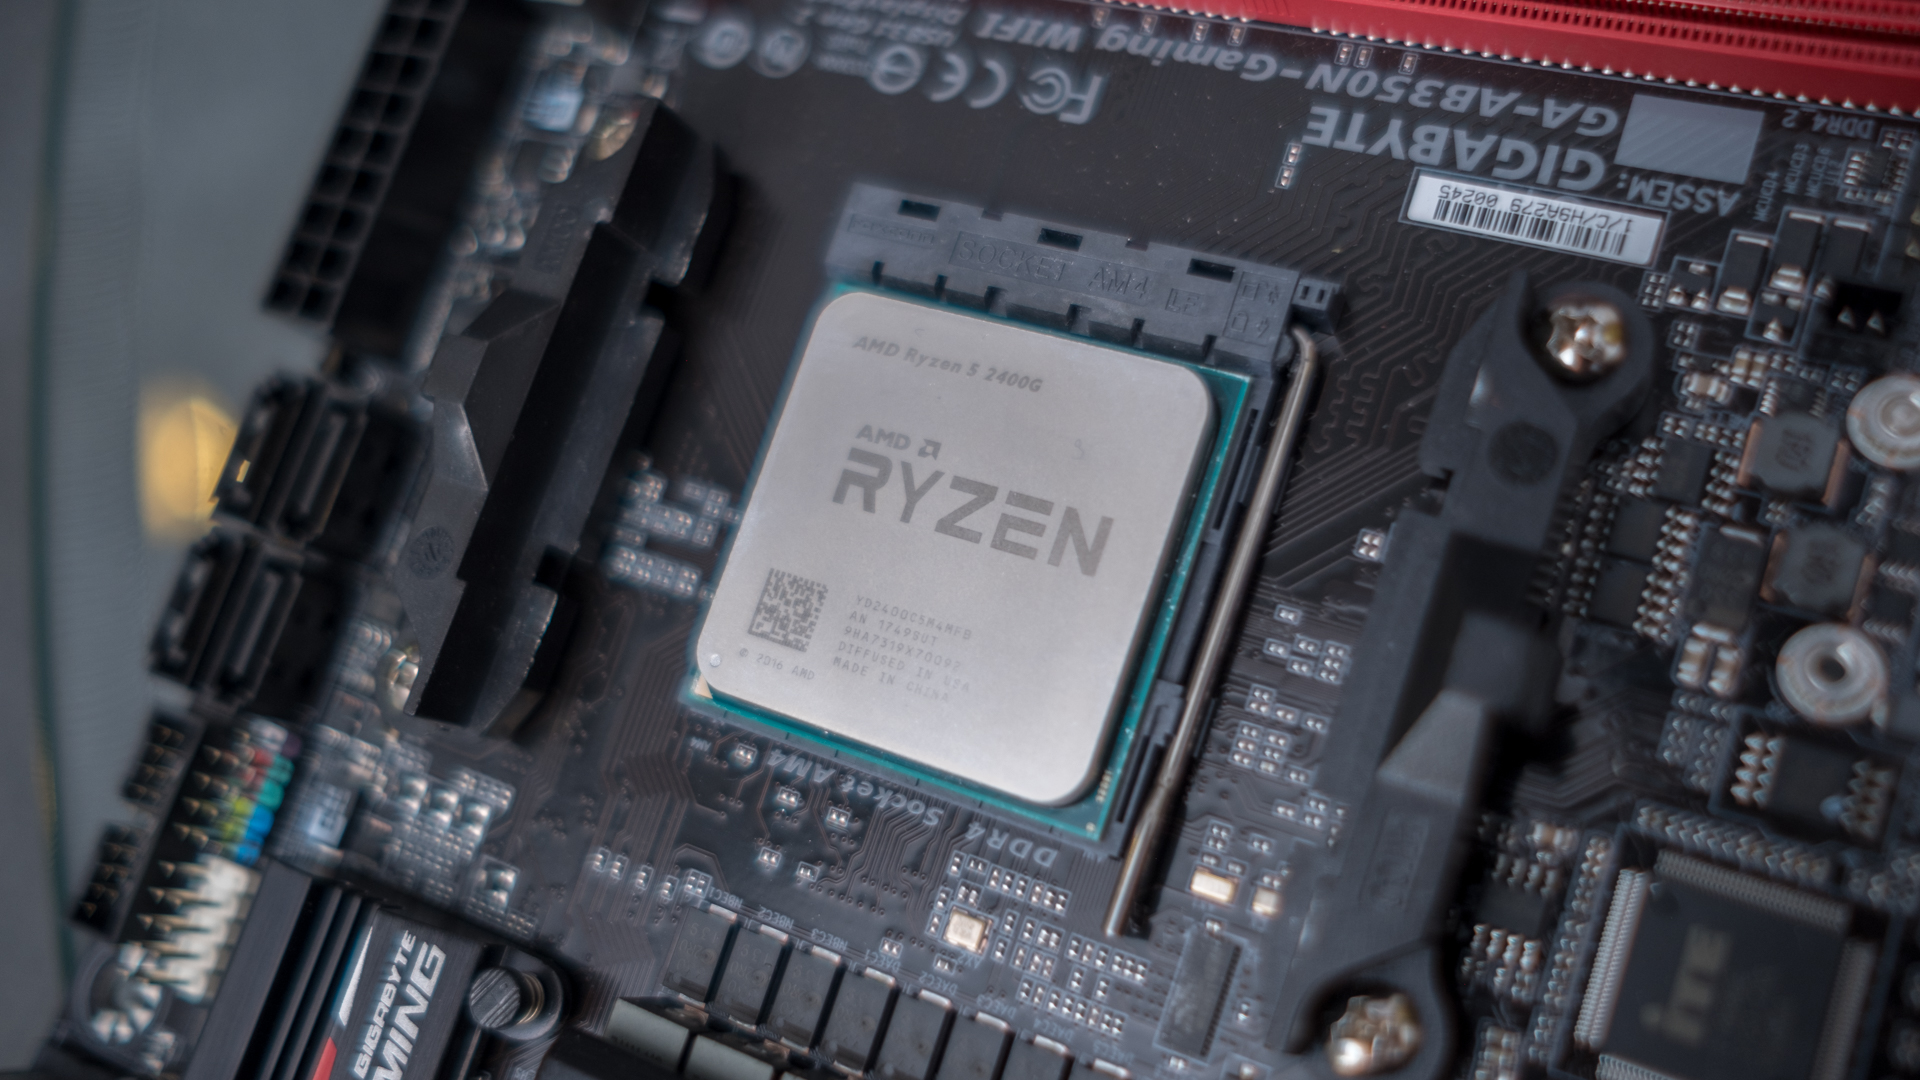  AMD Ryzen 7000 CPUs listed at retailer, suggesting launch could be soon 